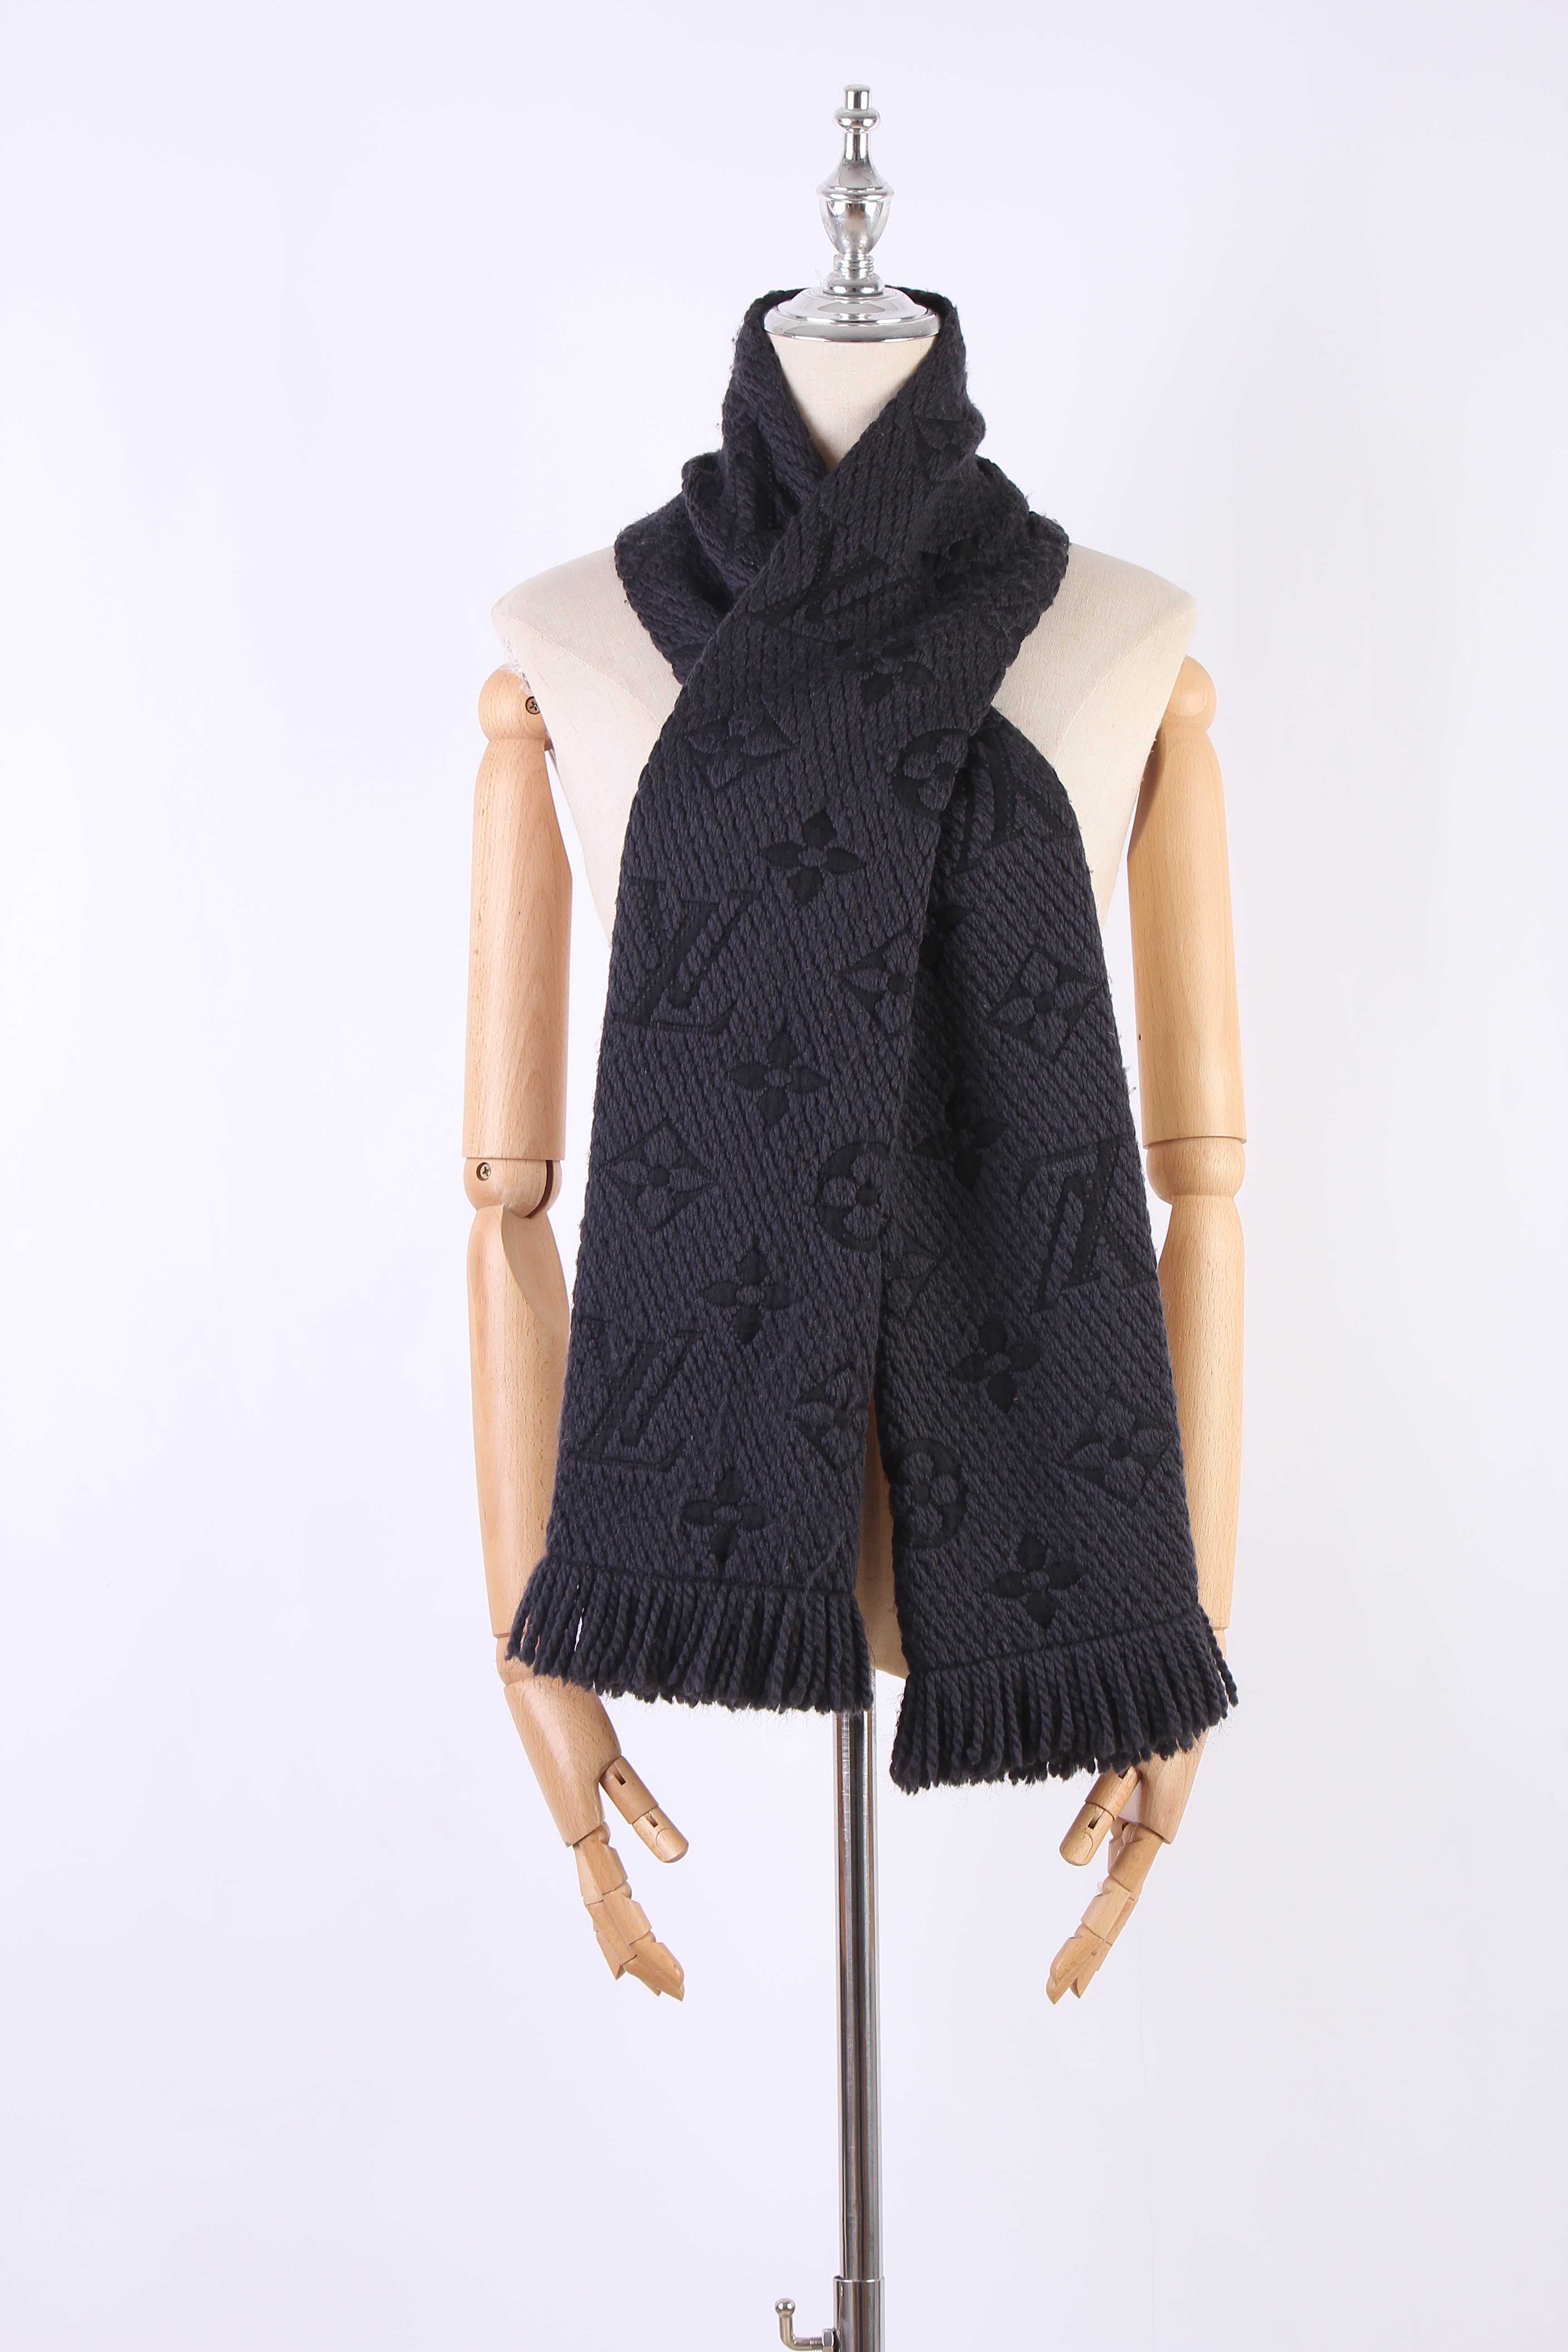 Products by Louis Vuitton: Logomania Scarf